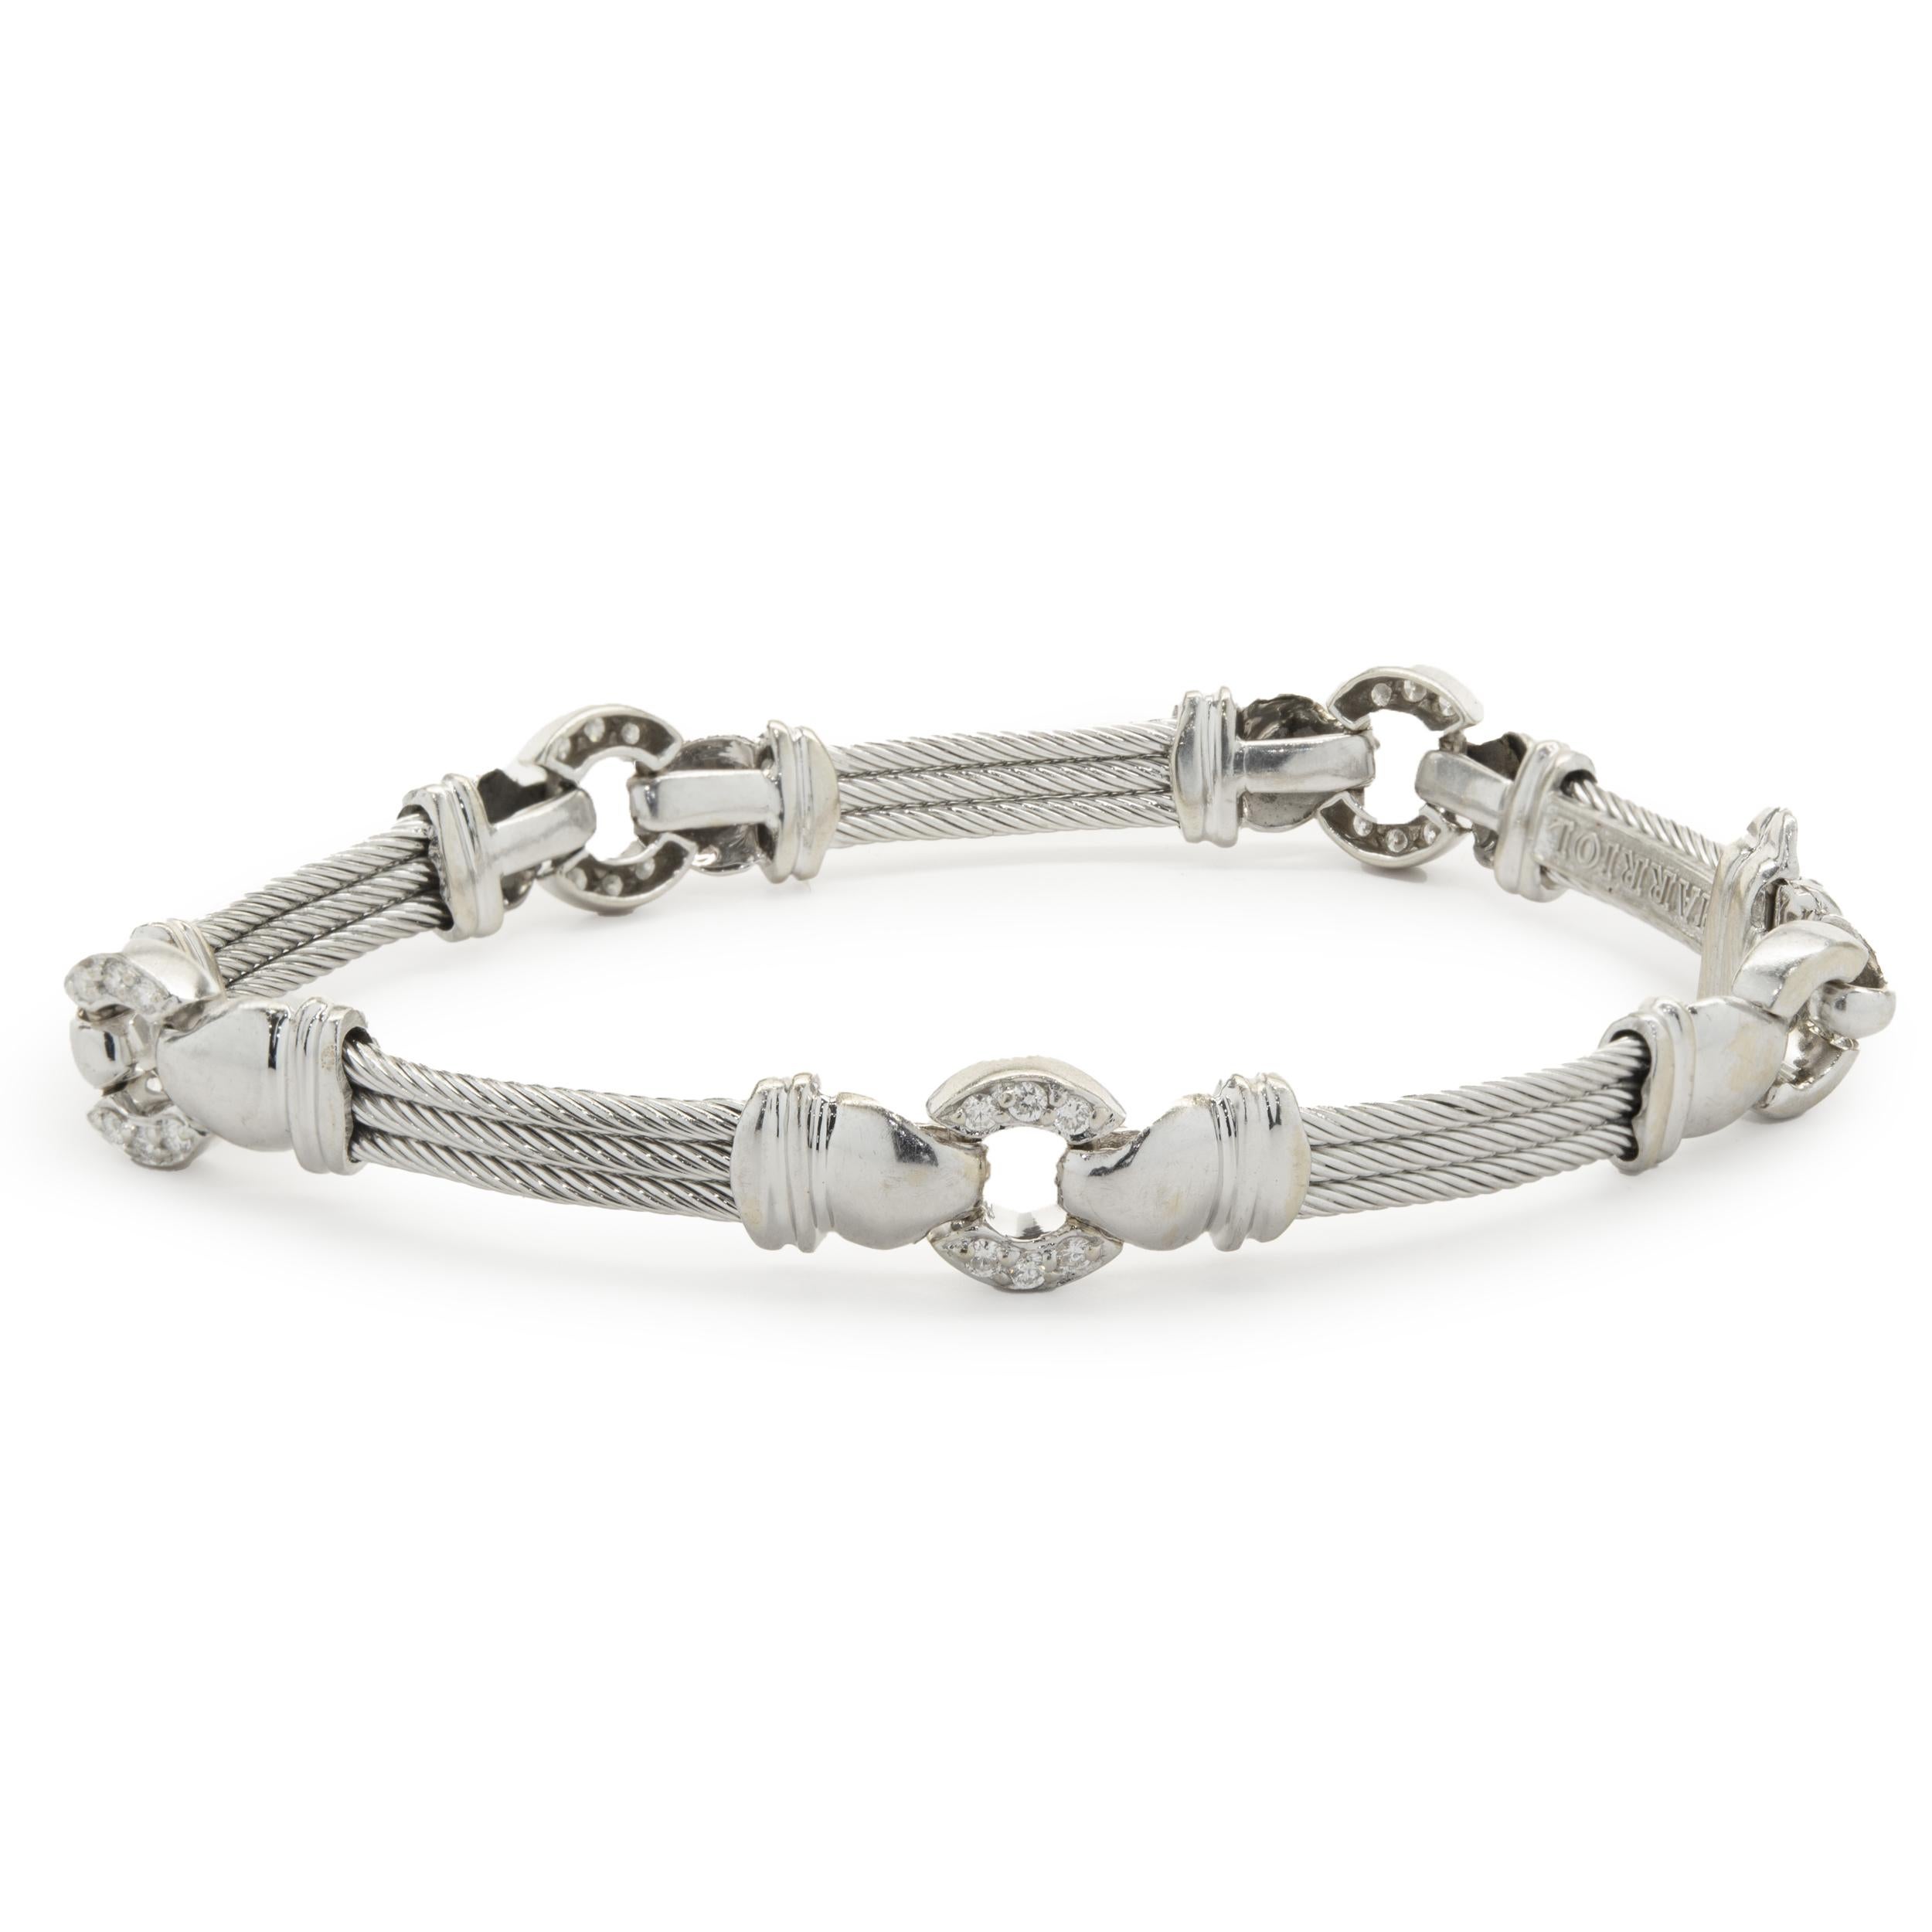 Designer: Charriol
Material: 18K white gold & stainless steel
Diamond: 24 round brilliant cut = .36cttw
Color: H
Clarity: SI1-2
Weight: 20.03 grams
Dimensions: bracelet measures 7-inches in length